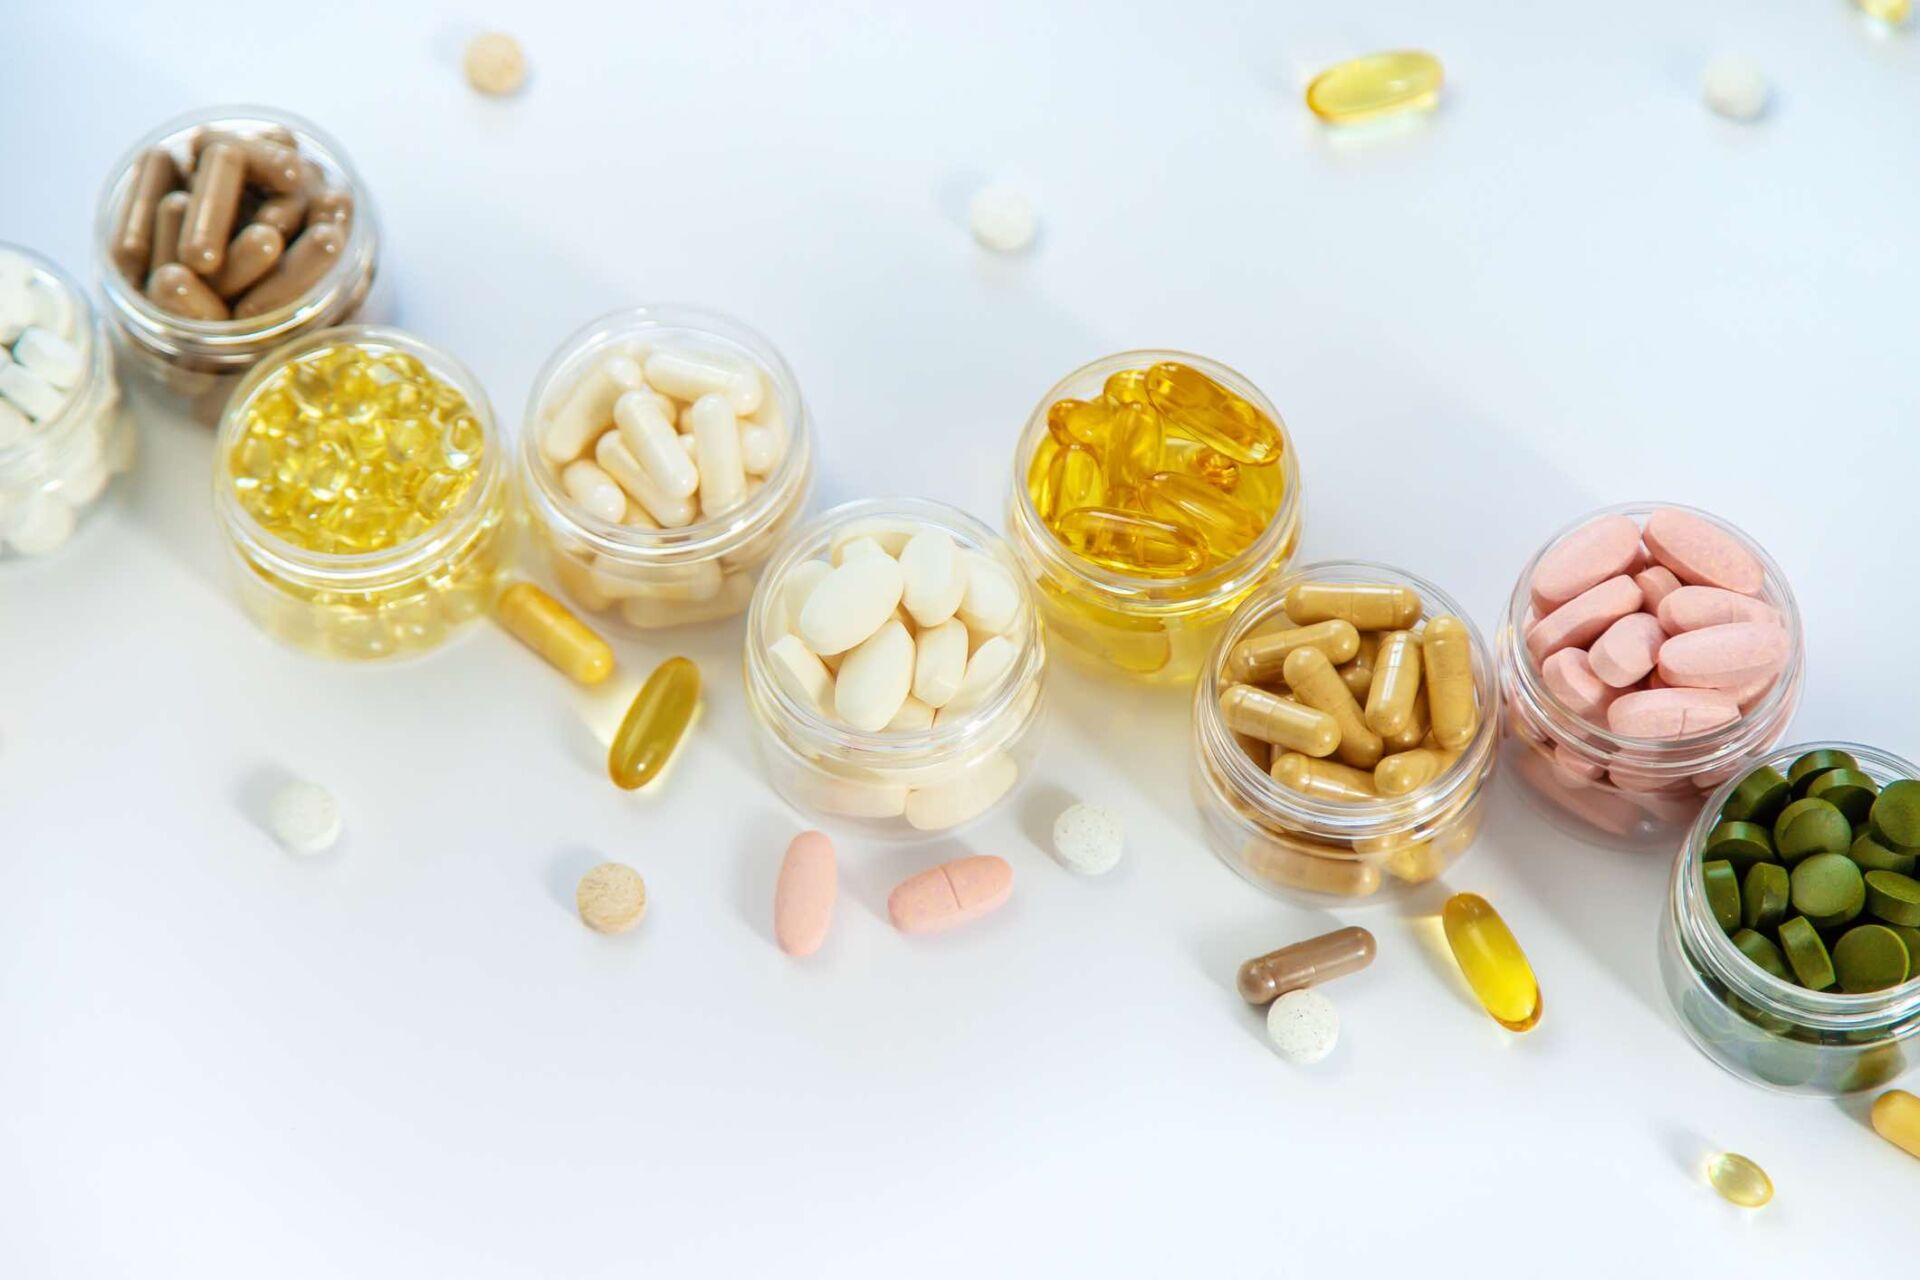 Industry Reacts to Study “Wrongly” Comparing Supplements to Rx